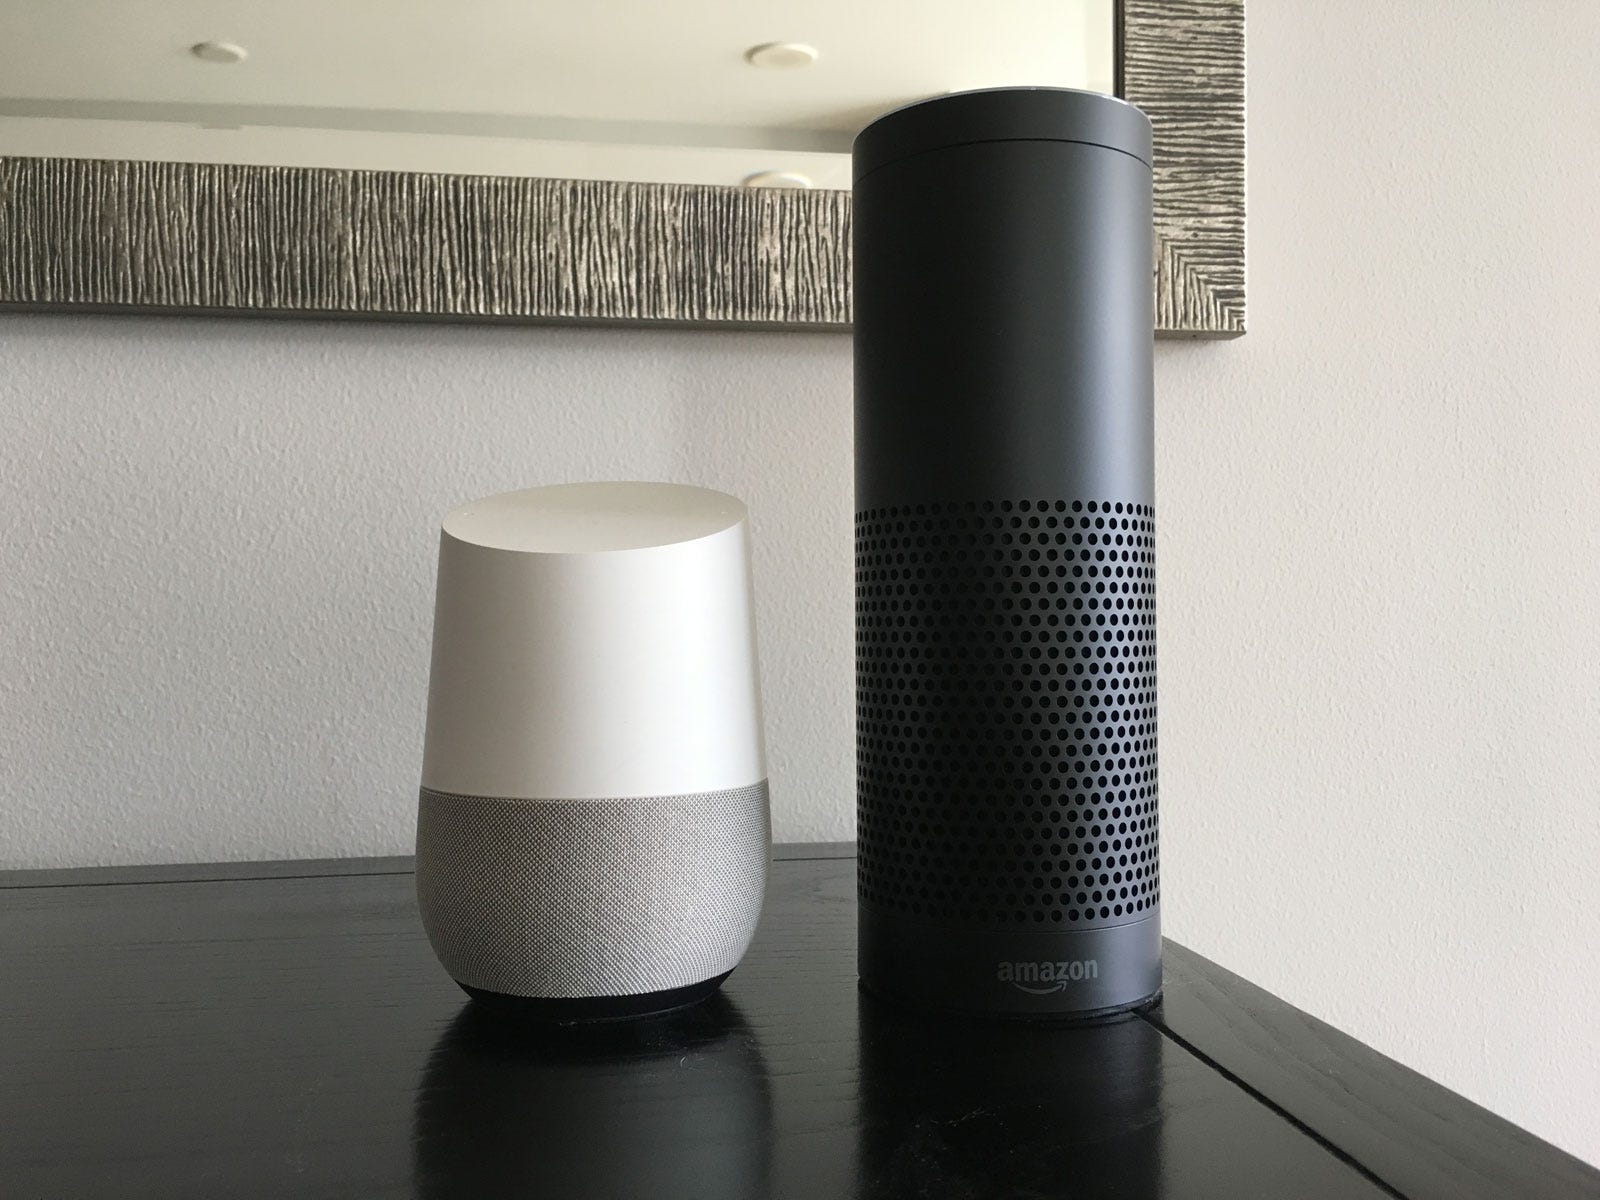 does google home work with alexa